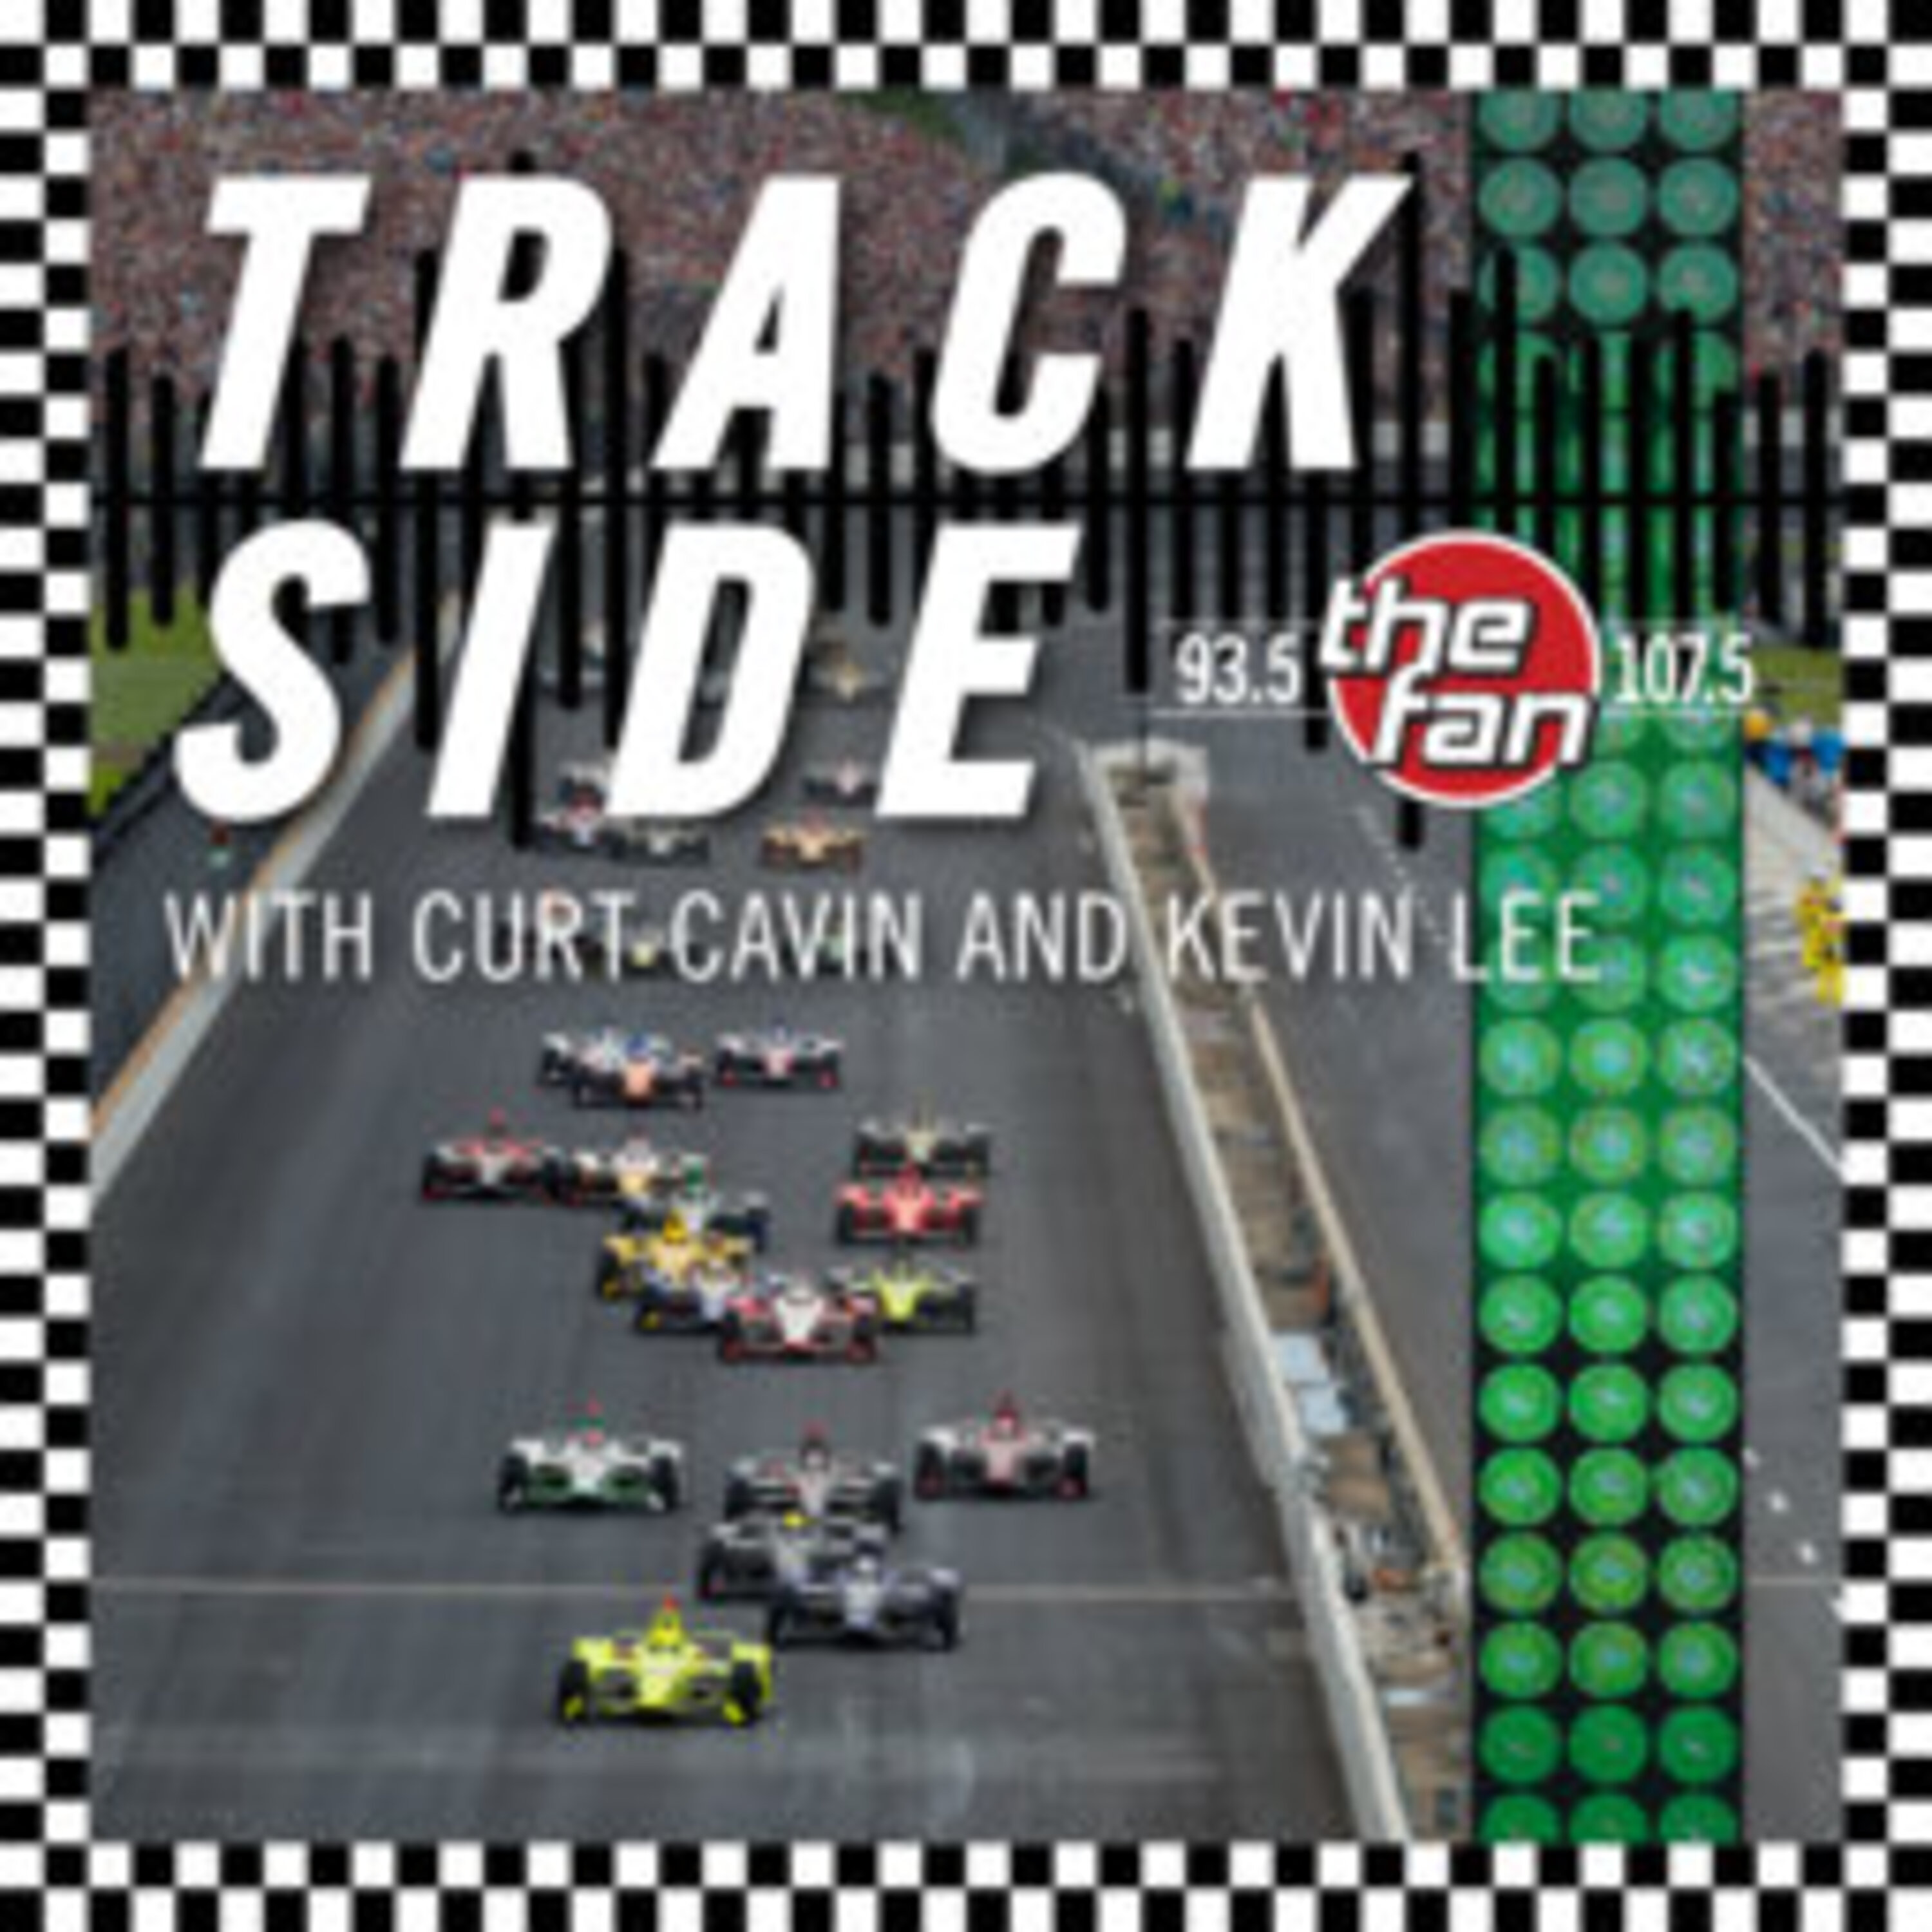 Curt and Kevin talk about Jerry Forsythe purchasing the Long Beach Grand Prix, talk to Mark Montieth on the new Bill Vukovich book, and more!